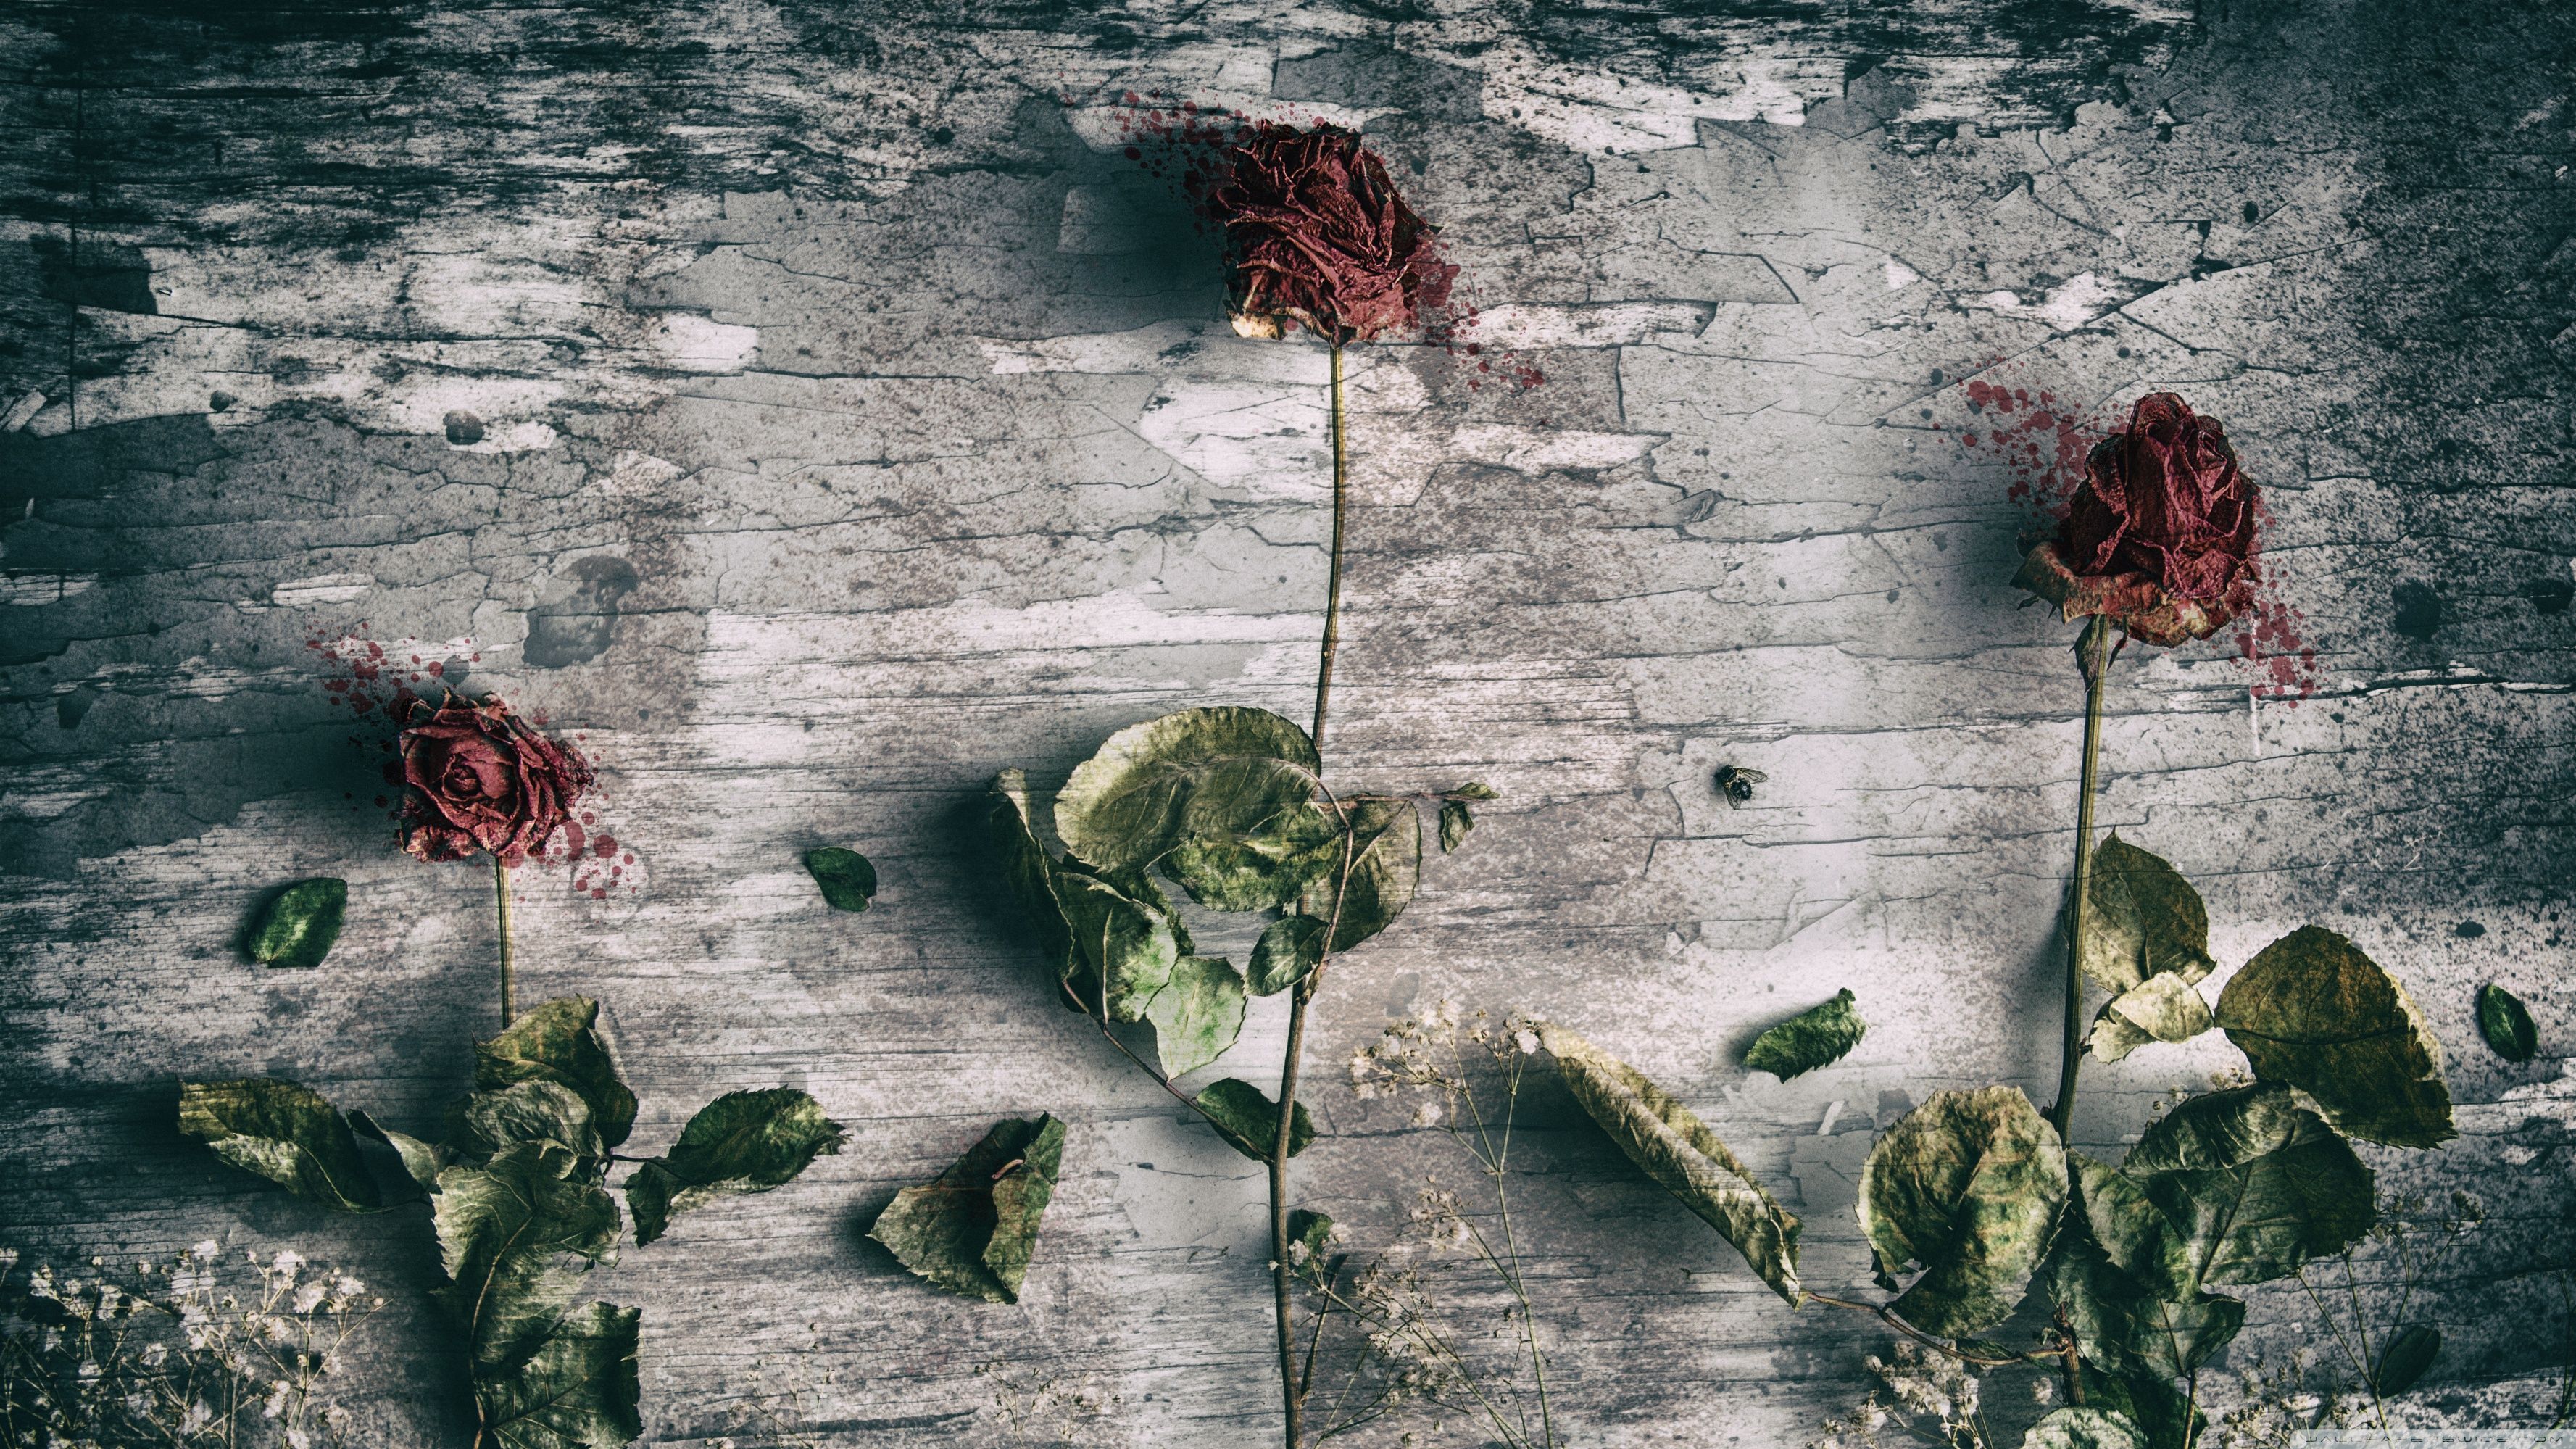 Dead Roses and a Fly Ultra HD Desktop Background Wallpaper for 4K